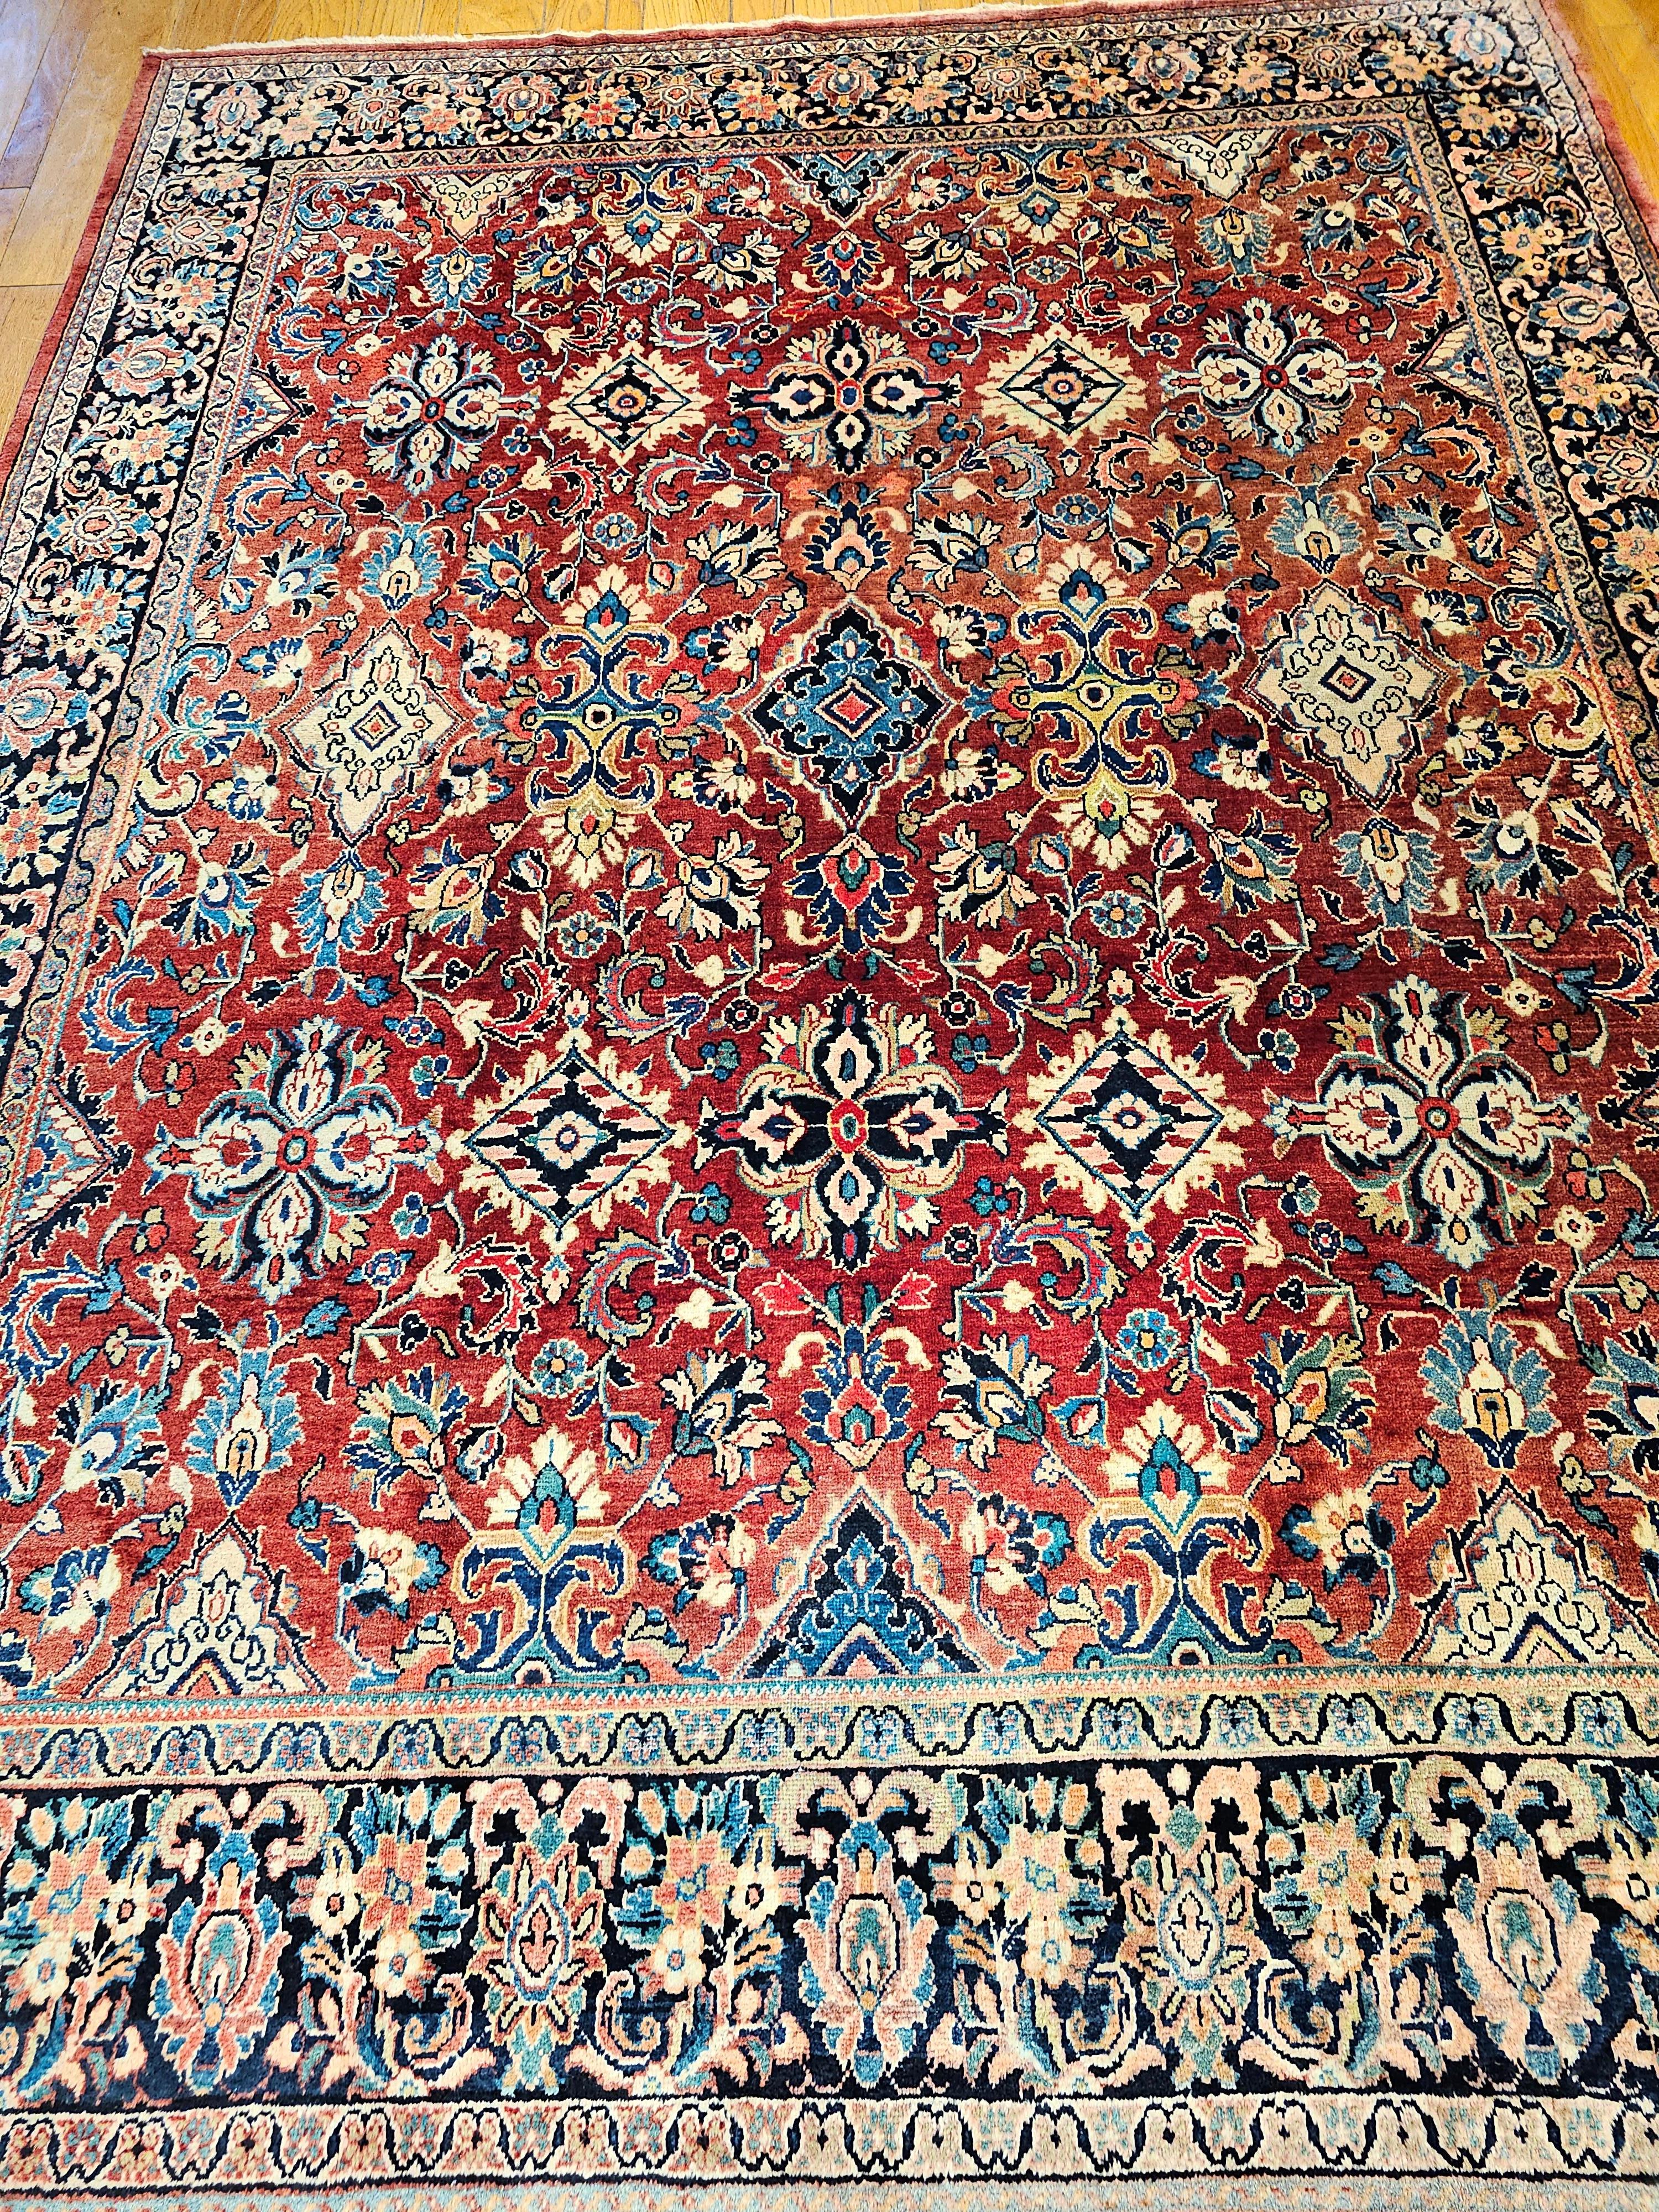 The vintage Persian Mahal Sultanabad room size rug with an allover design pattern of  large geometric forms interwoven with larger flower forms is in the red field and a dark navy blue border. The use of bright reds, blue, pink, and shades of other